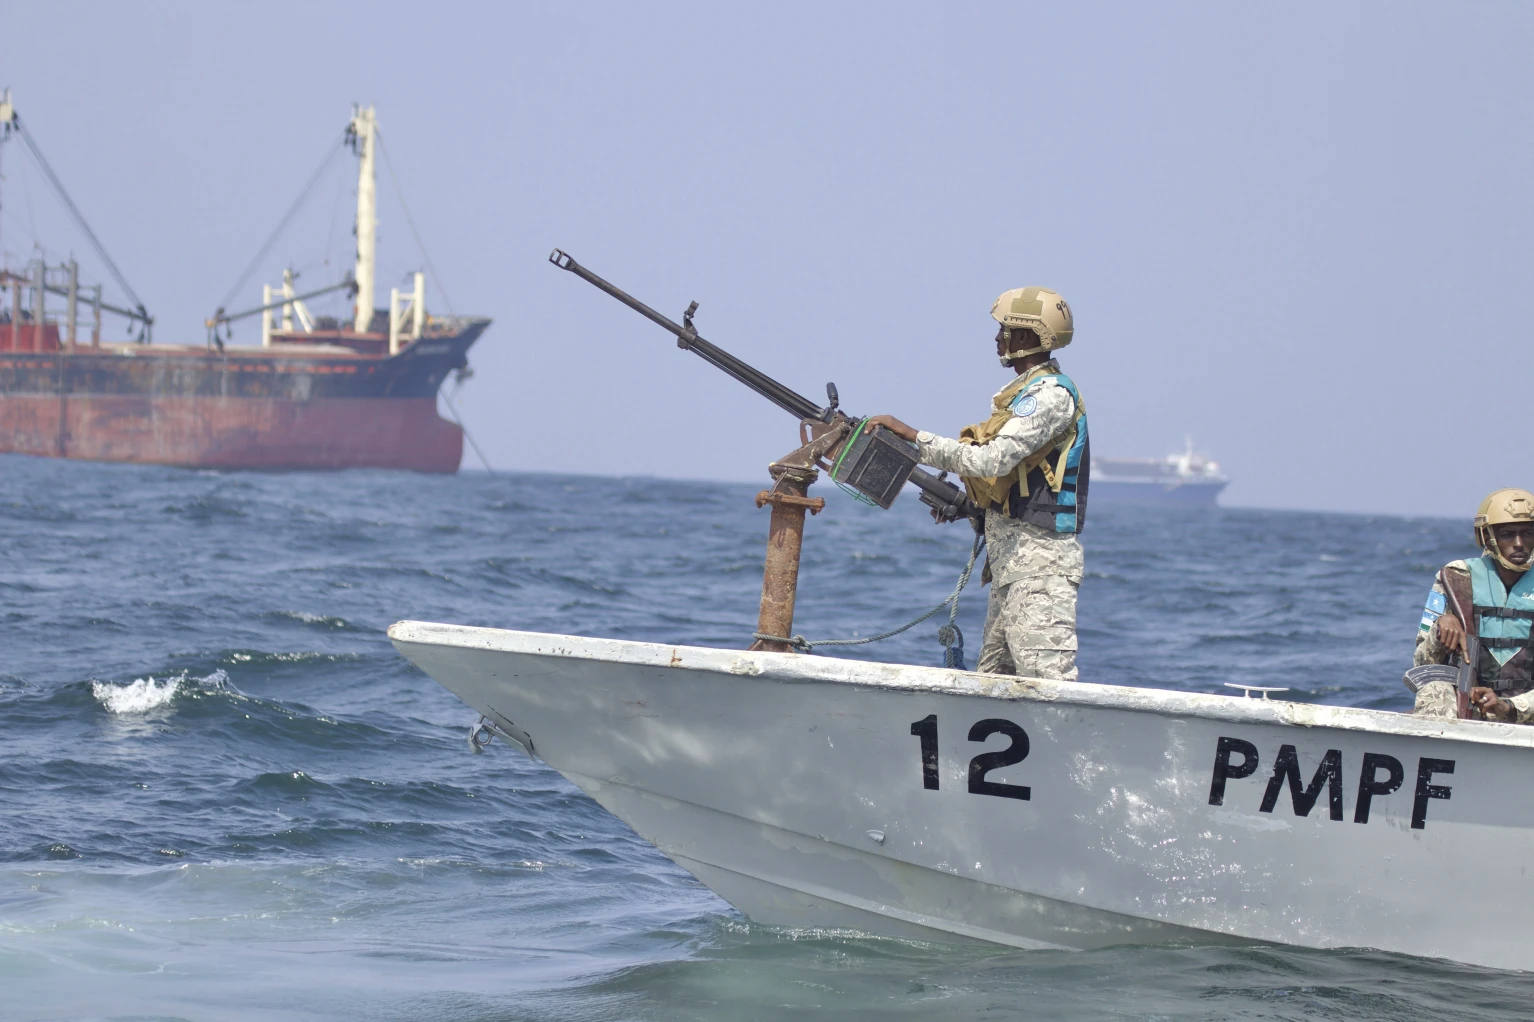 Surge in piracy in Gulf of Aden prompts Somali maritime police to beef up patrols in Indian Ocean